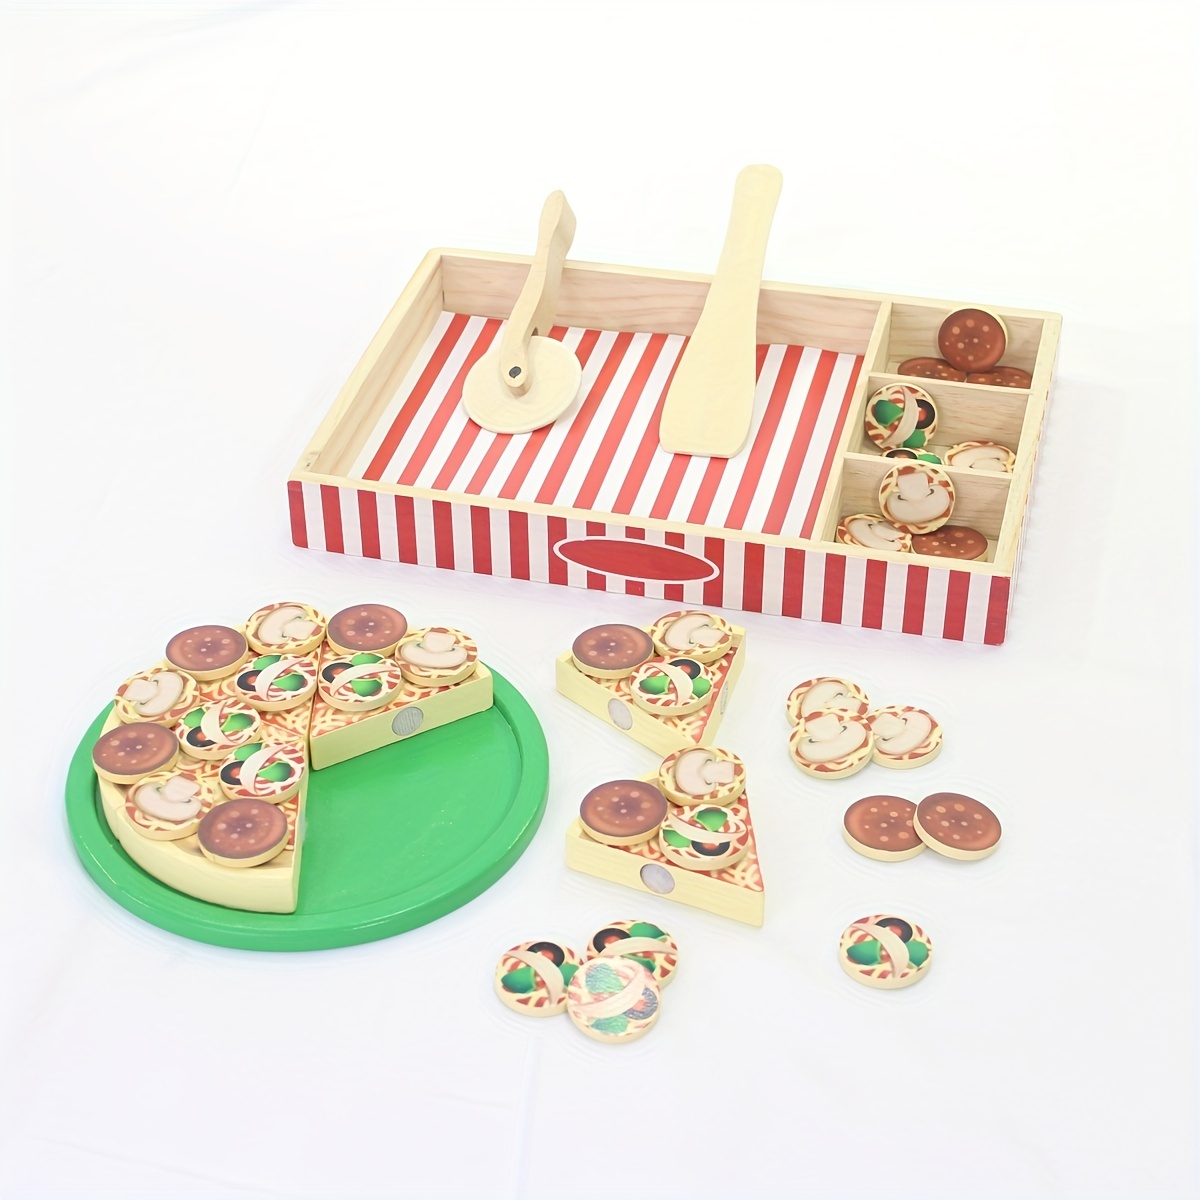  Melissa & Doug Wooden Pizza Play Food Set With 36